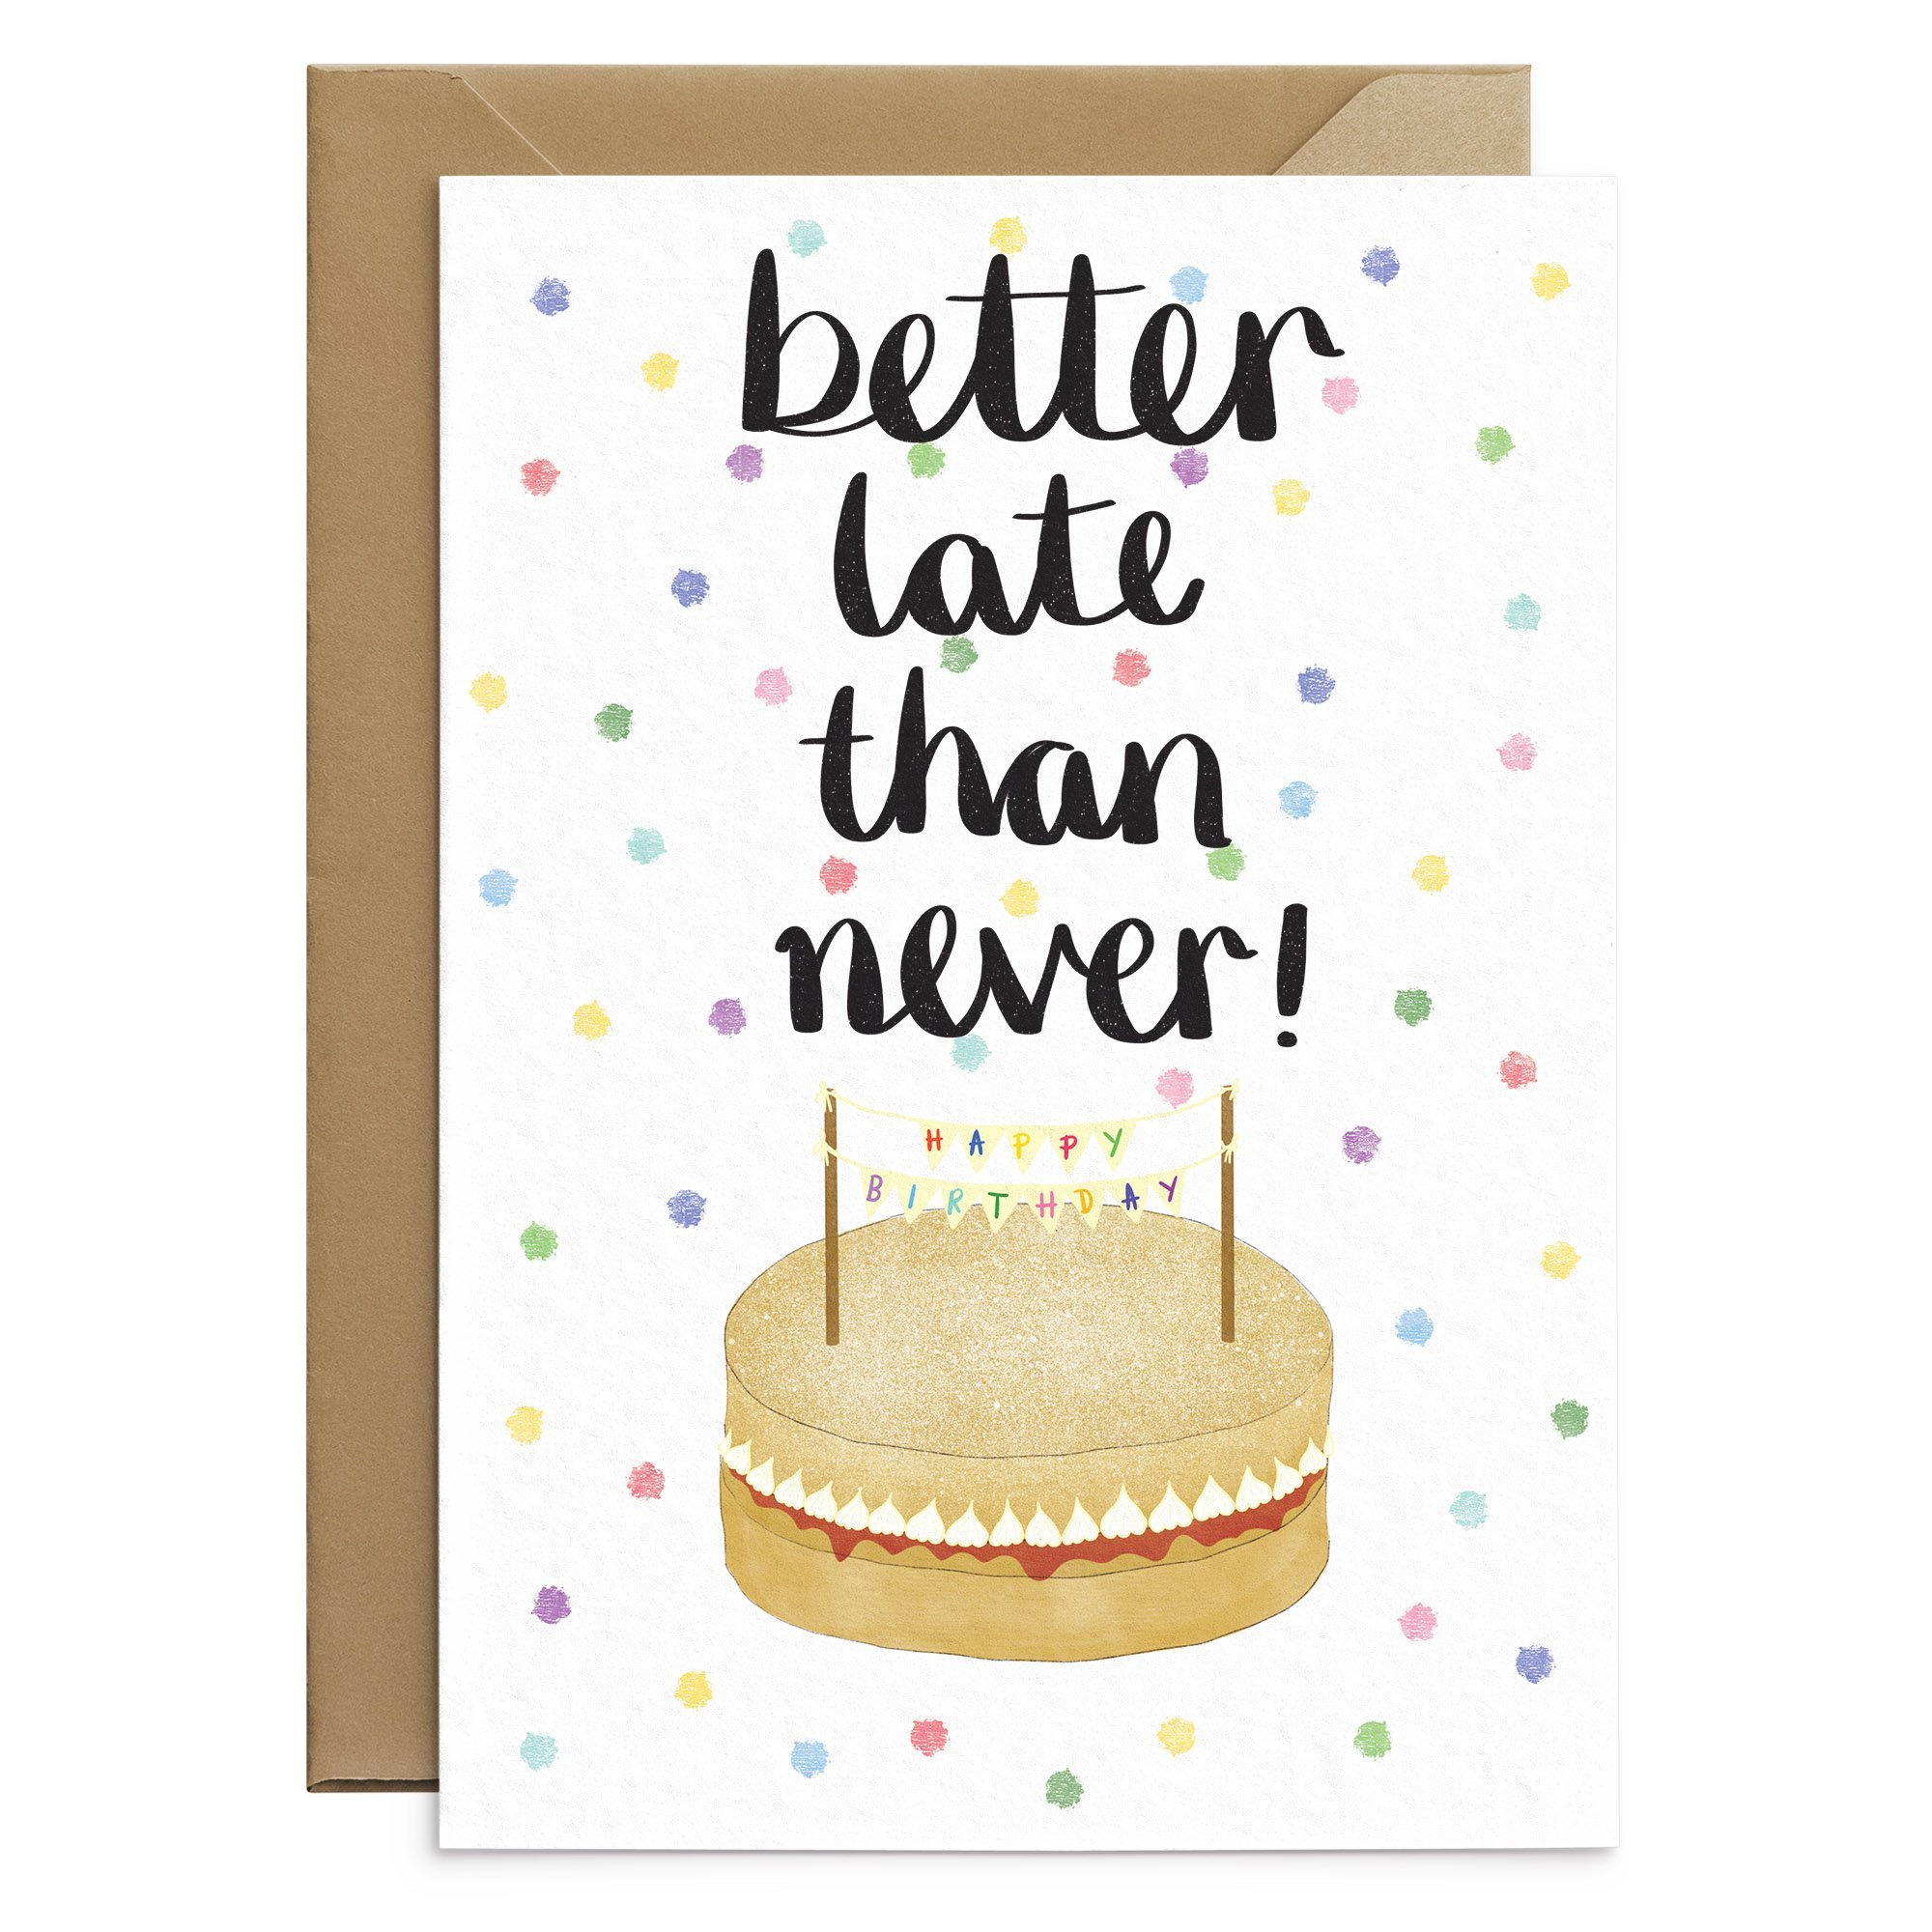 paper-birthday-cards-happy-belated-birthday-card-set-better-late-than